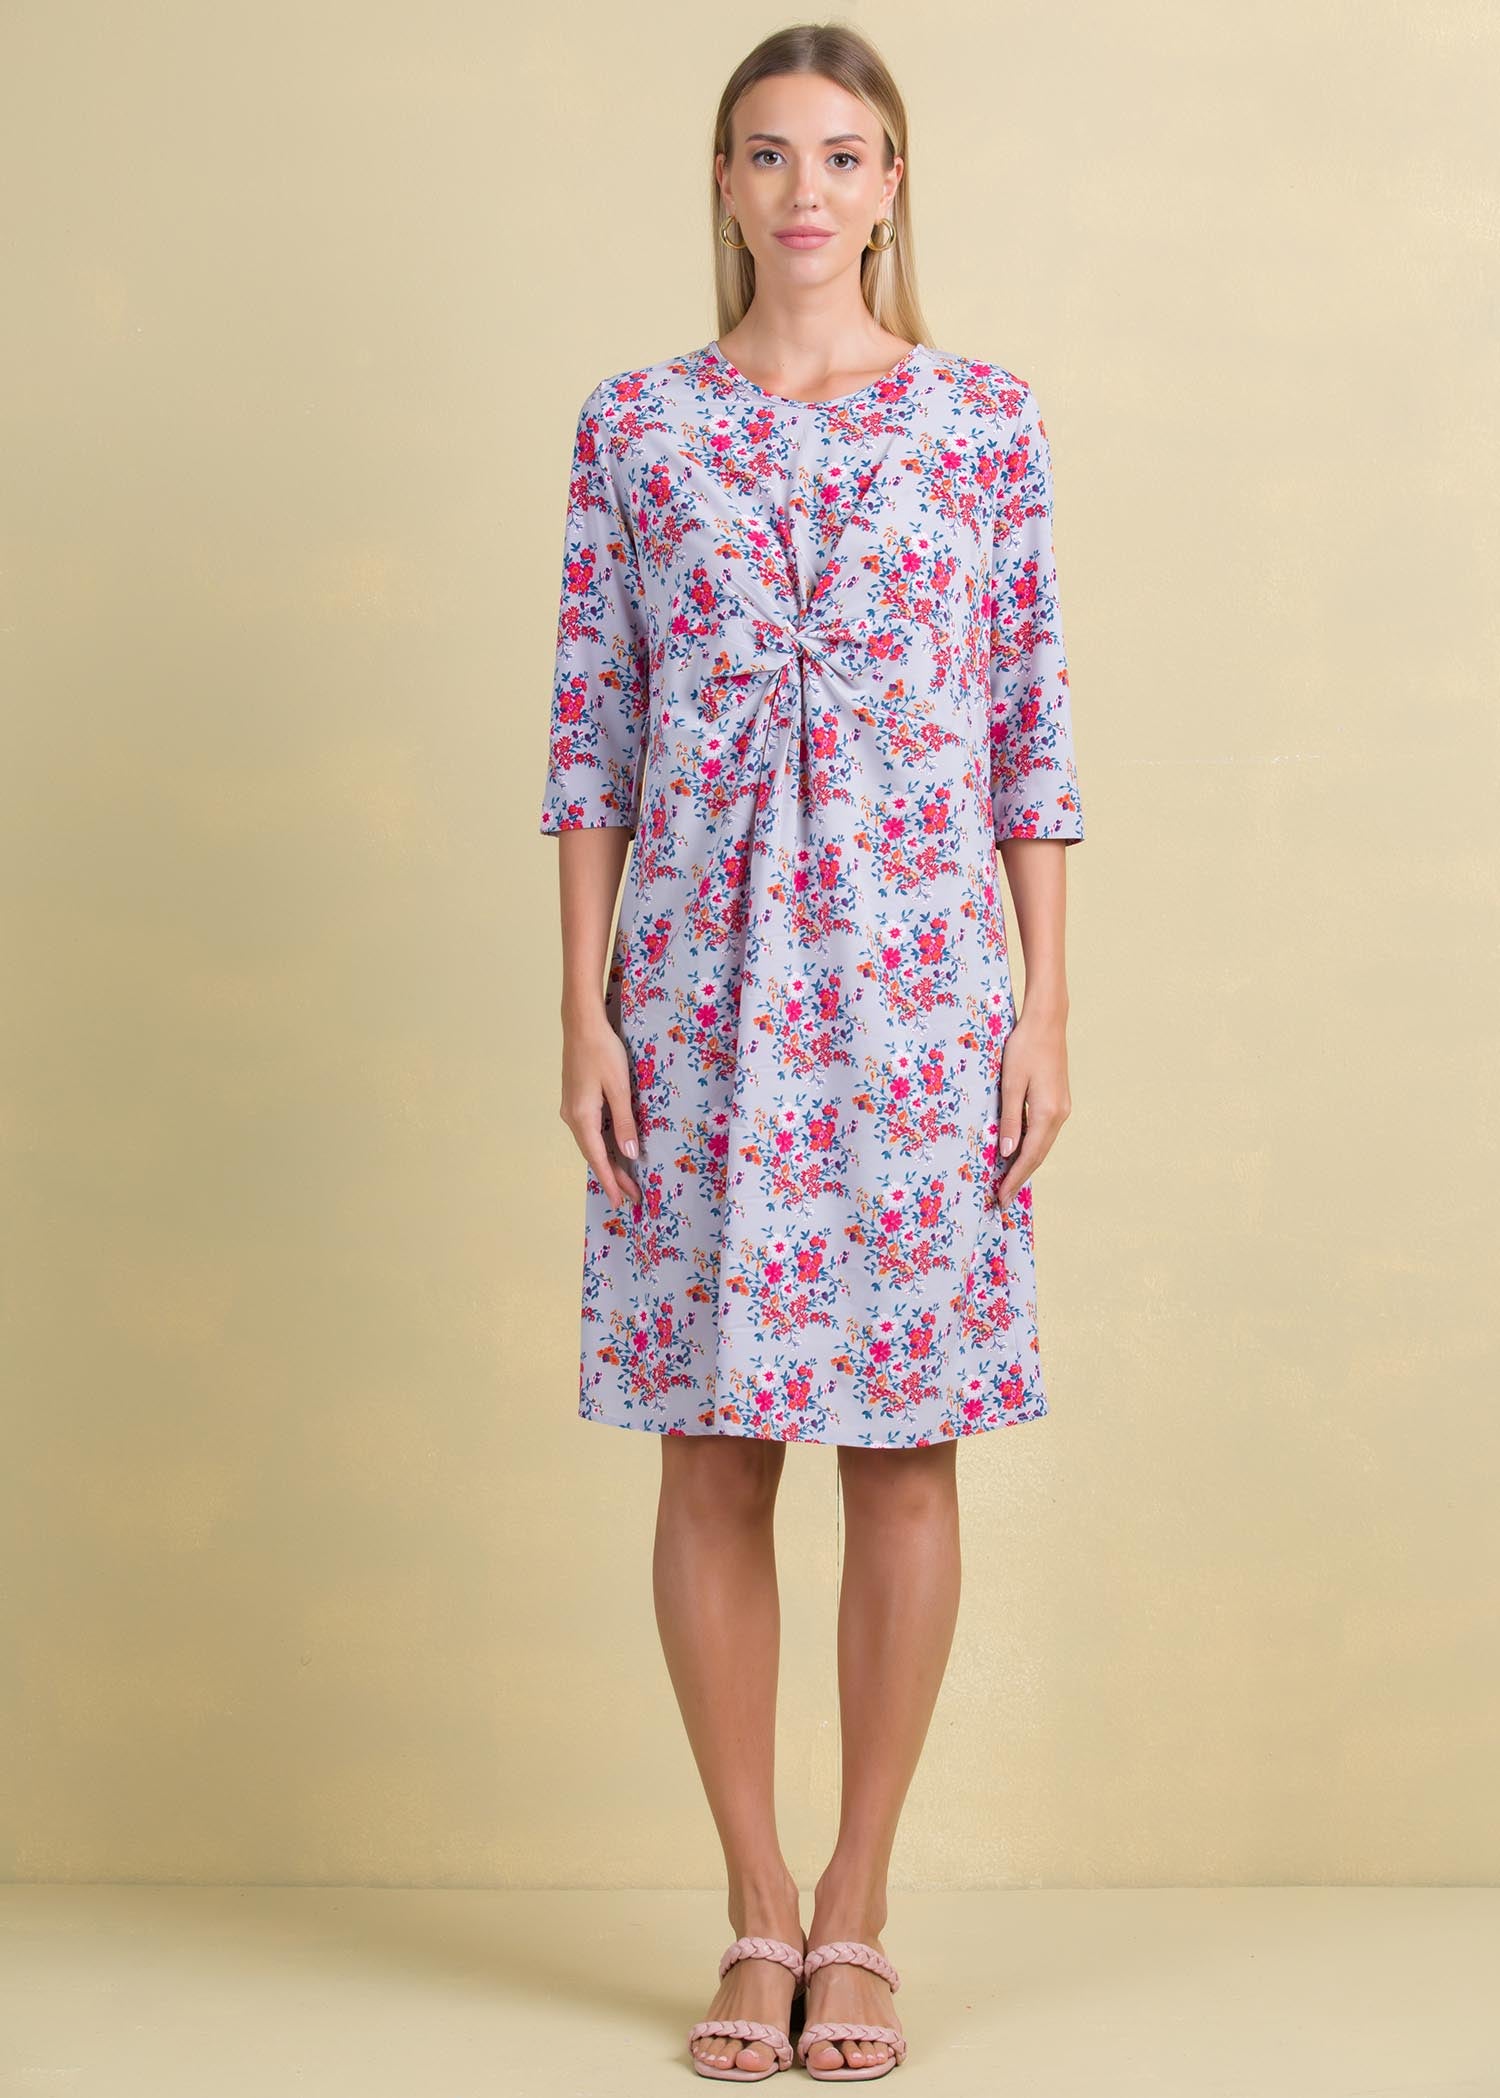 Printed dress with front twist